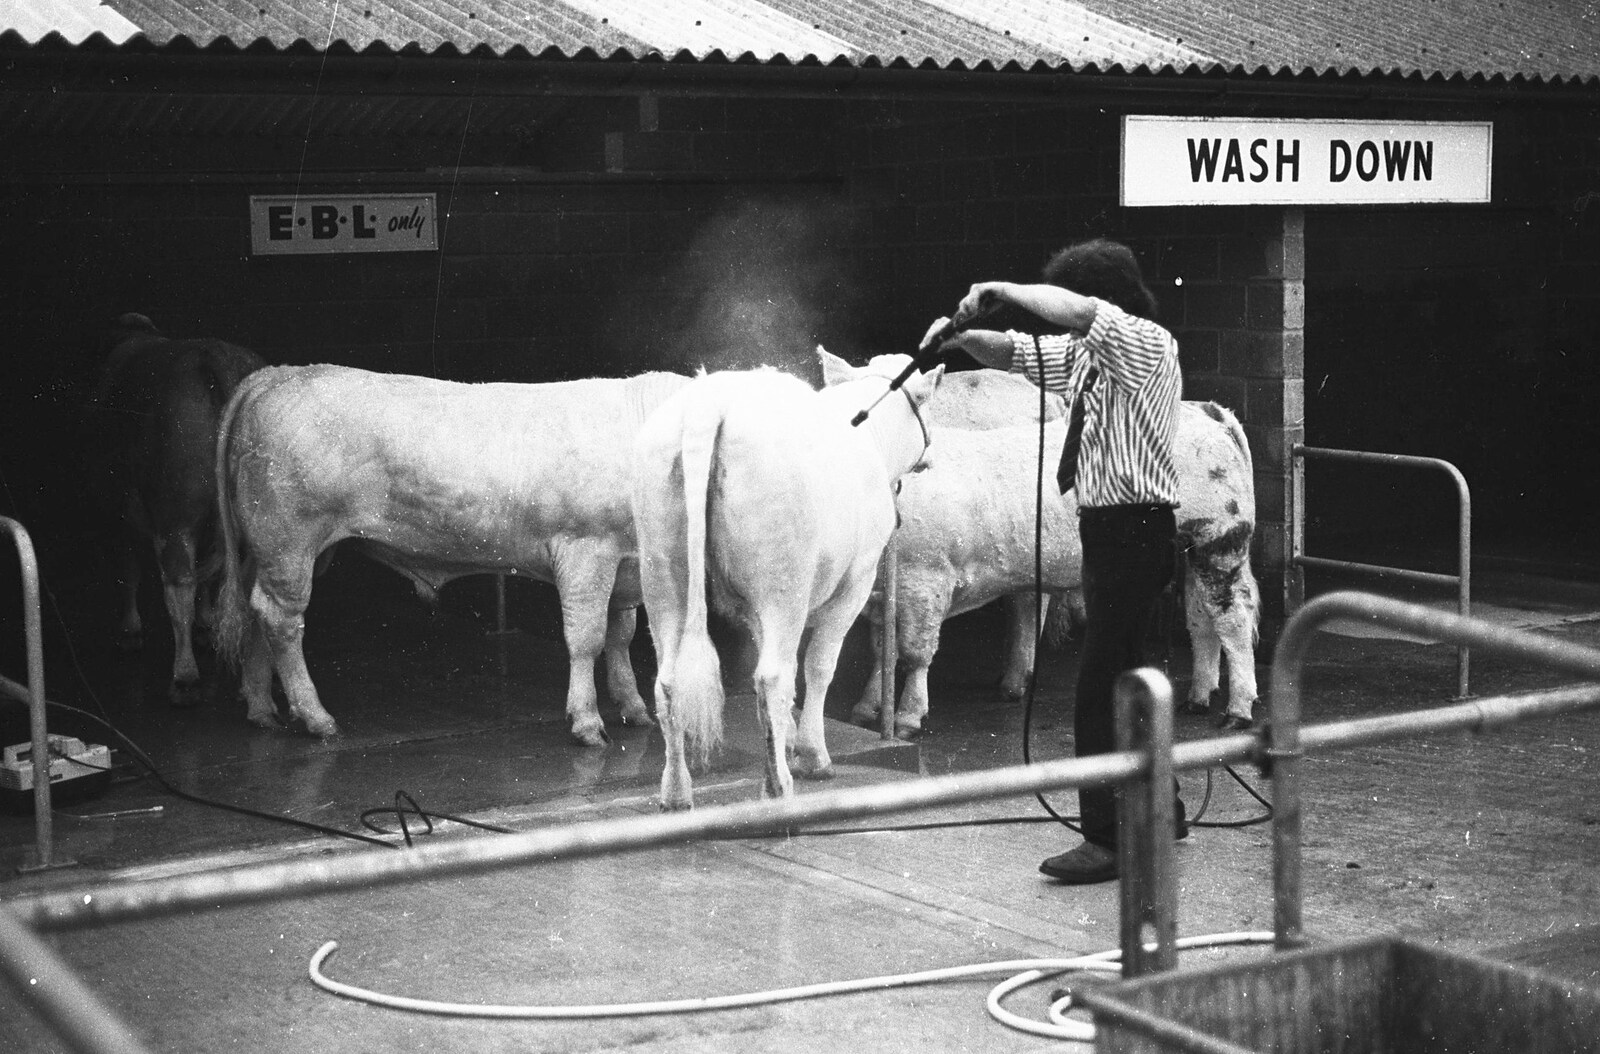 The Royal Norfolk Show, Costessey, Norwich - June 20th 1994: Some cows get hosed down